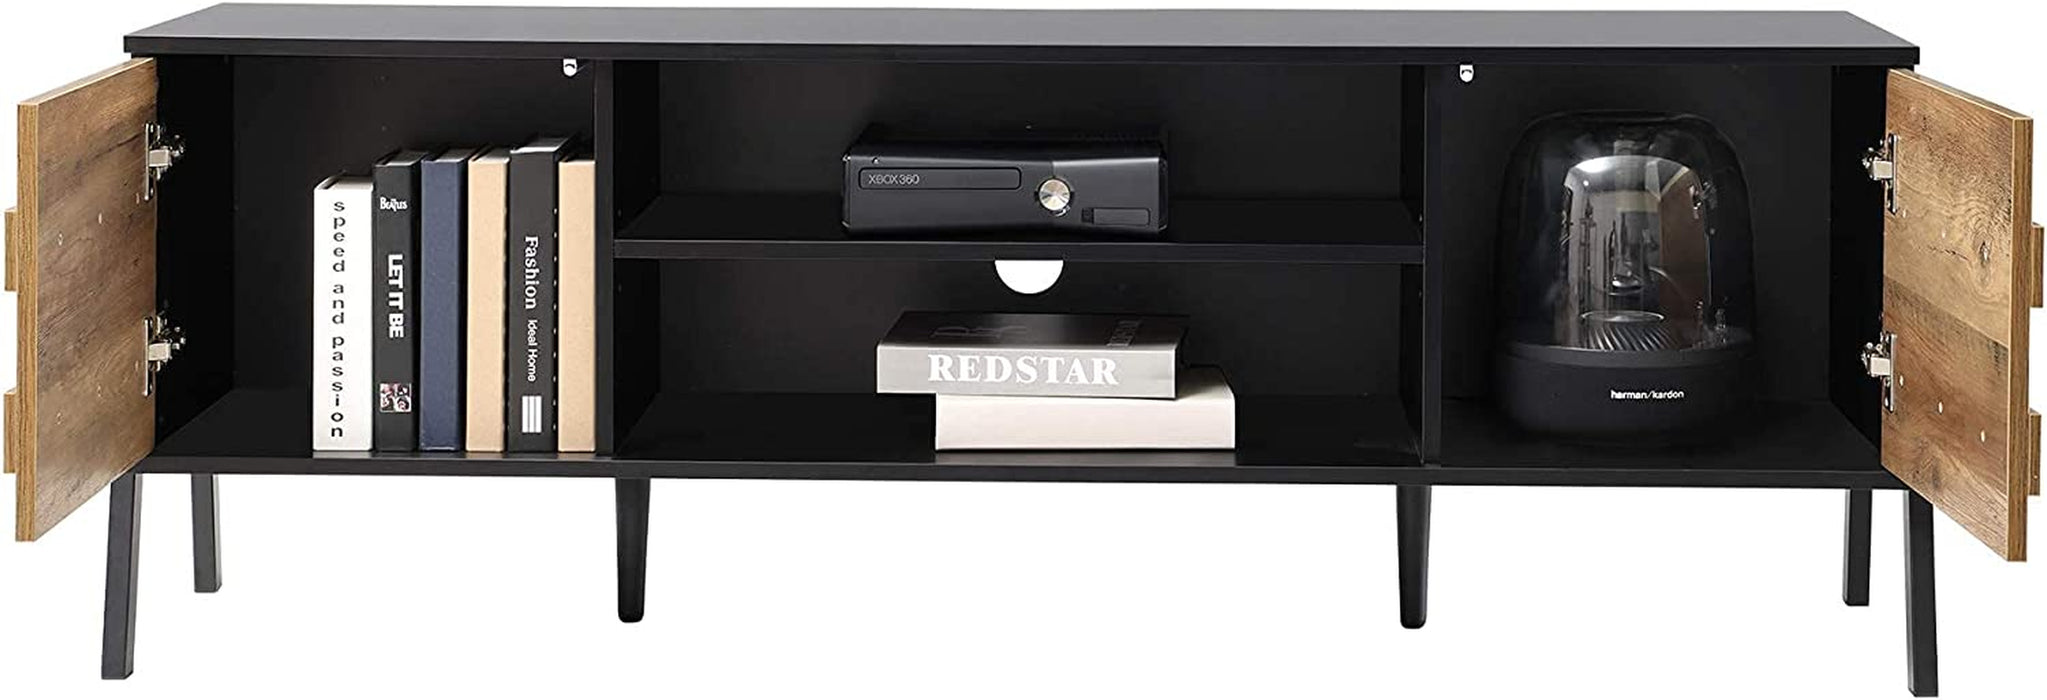 Black and Oak TV Stand for 65 Inch Flat Screen